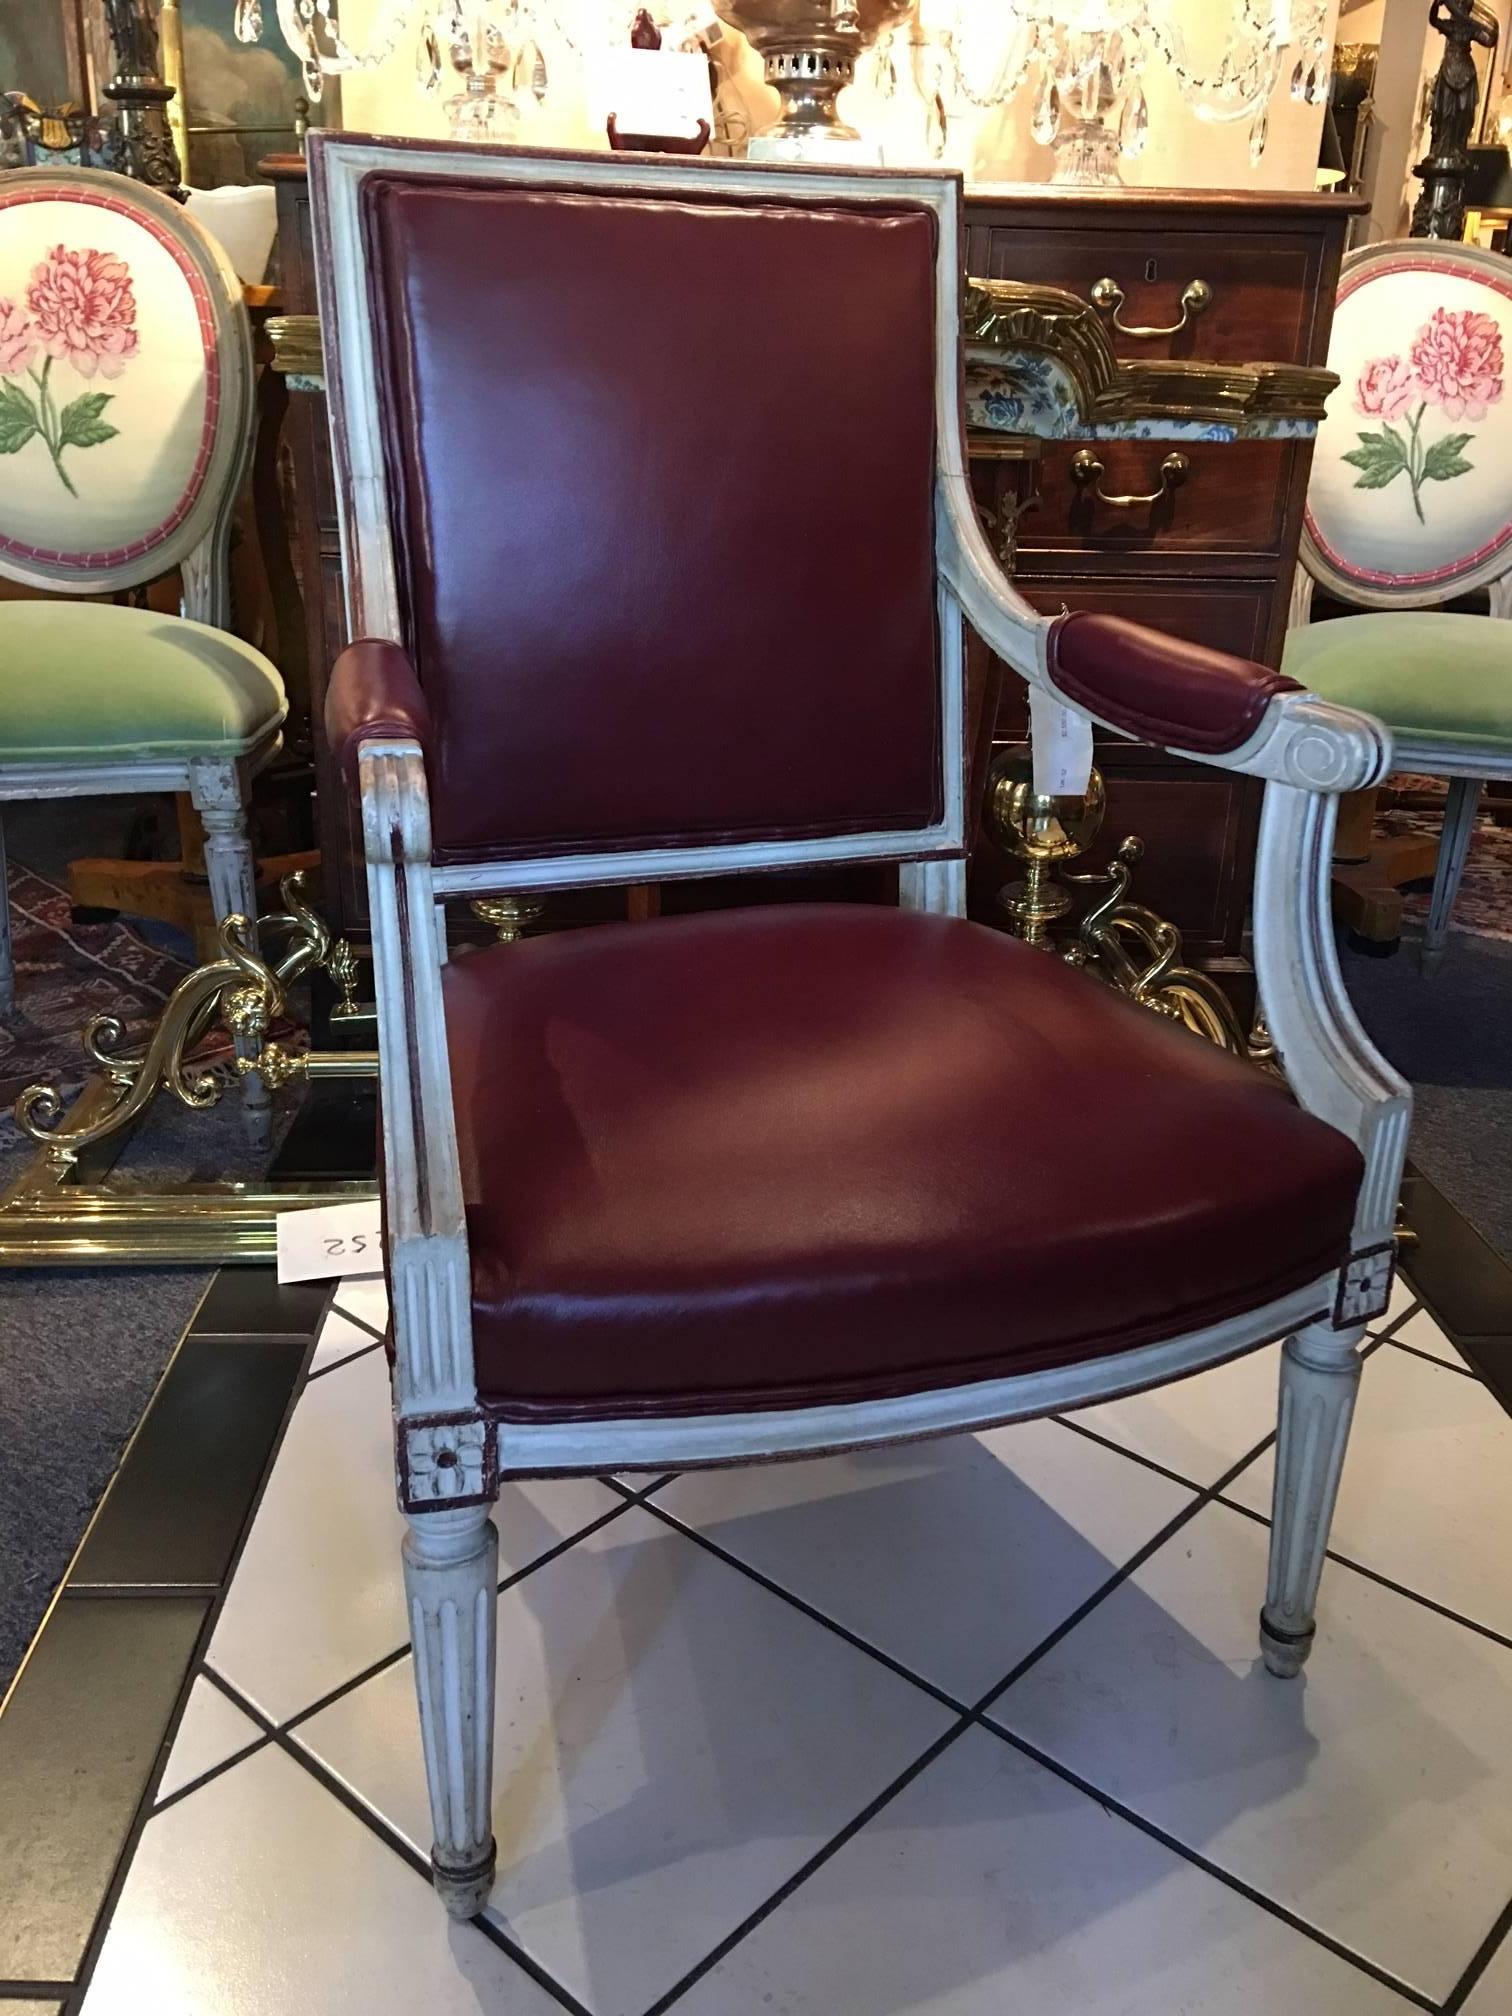 Pair of 19th century Louis XVI style painted fauteuils or armchairs upholstered in leather. Newly upholstered.